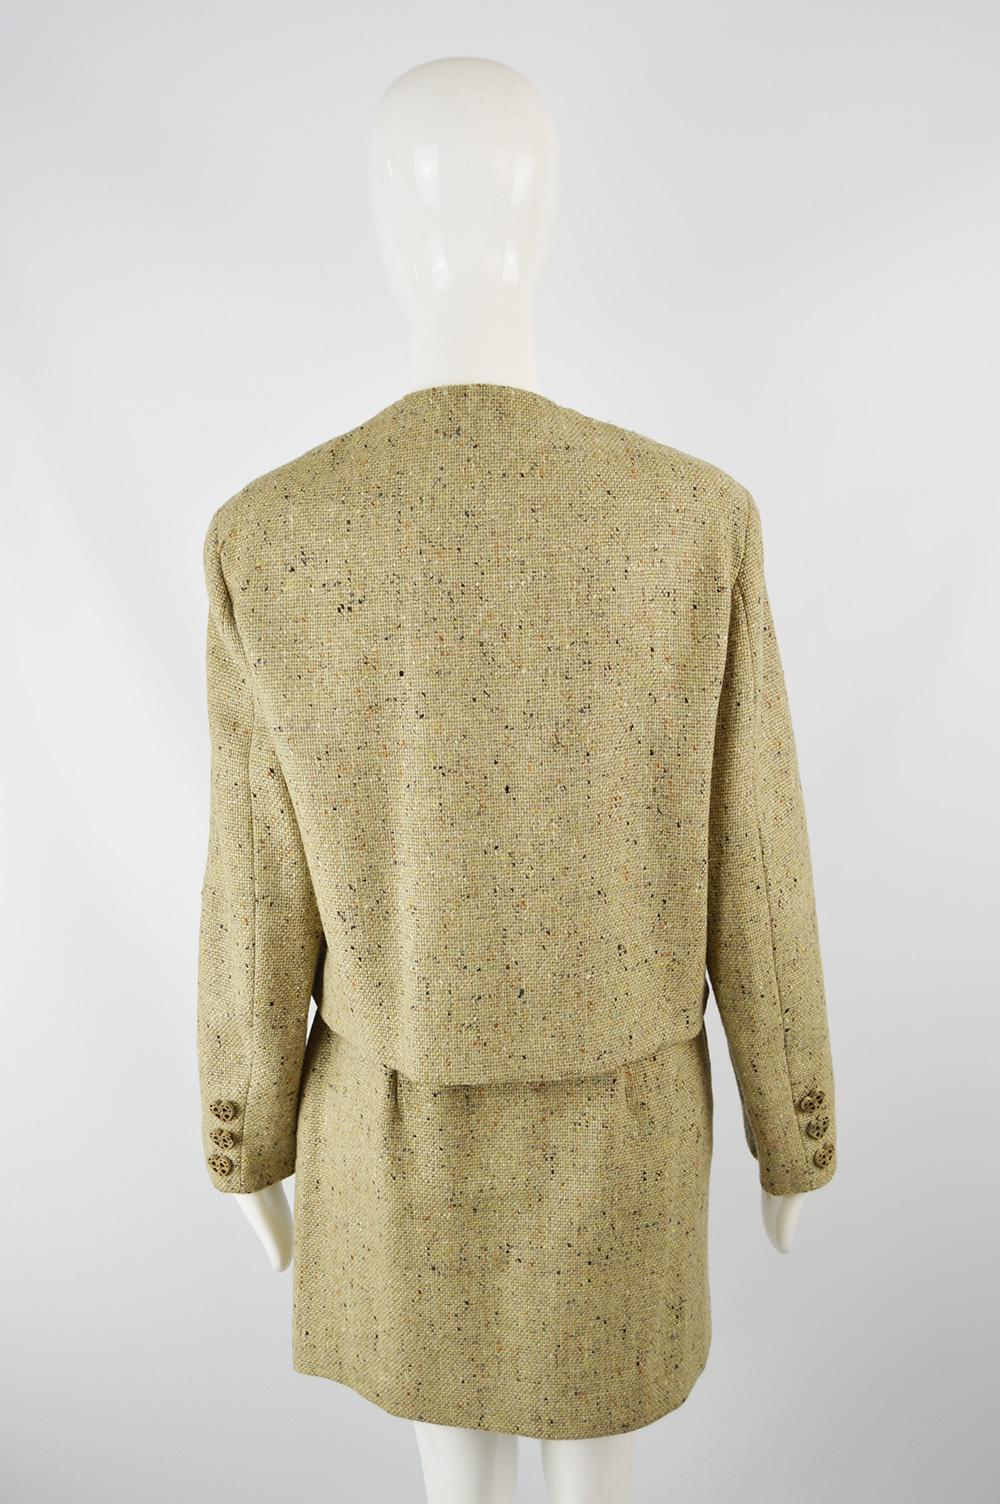 Moschino Vintage Wool Tweed 2 Piece Jacket & Skirt Suit with Heart Button, 1990s For Sale 3